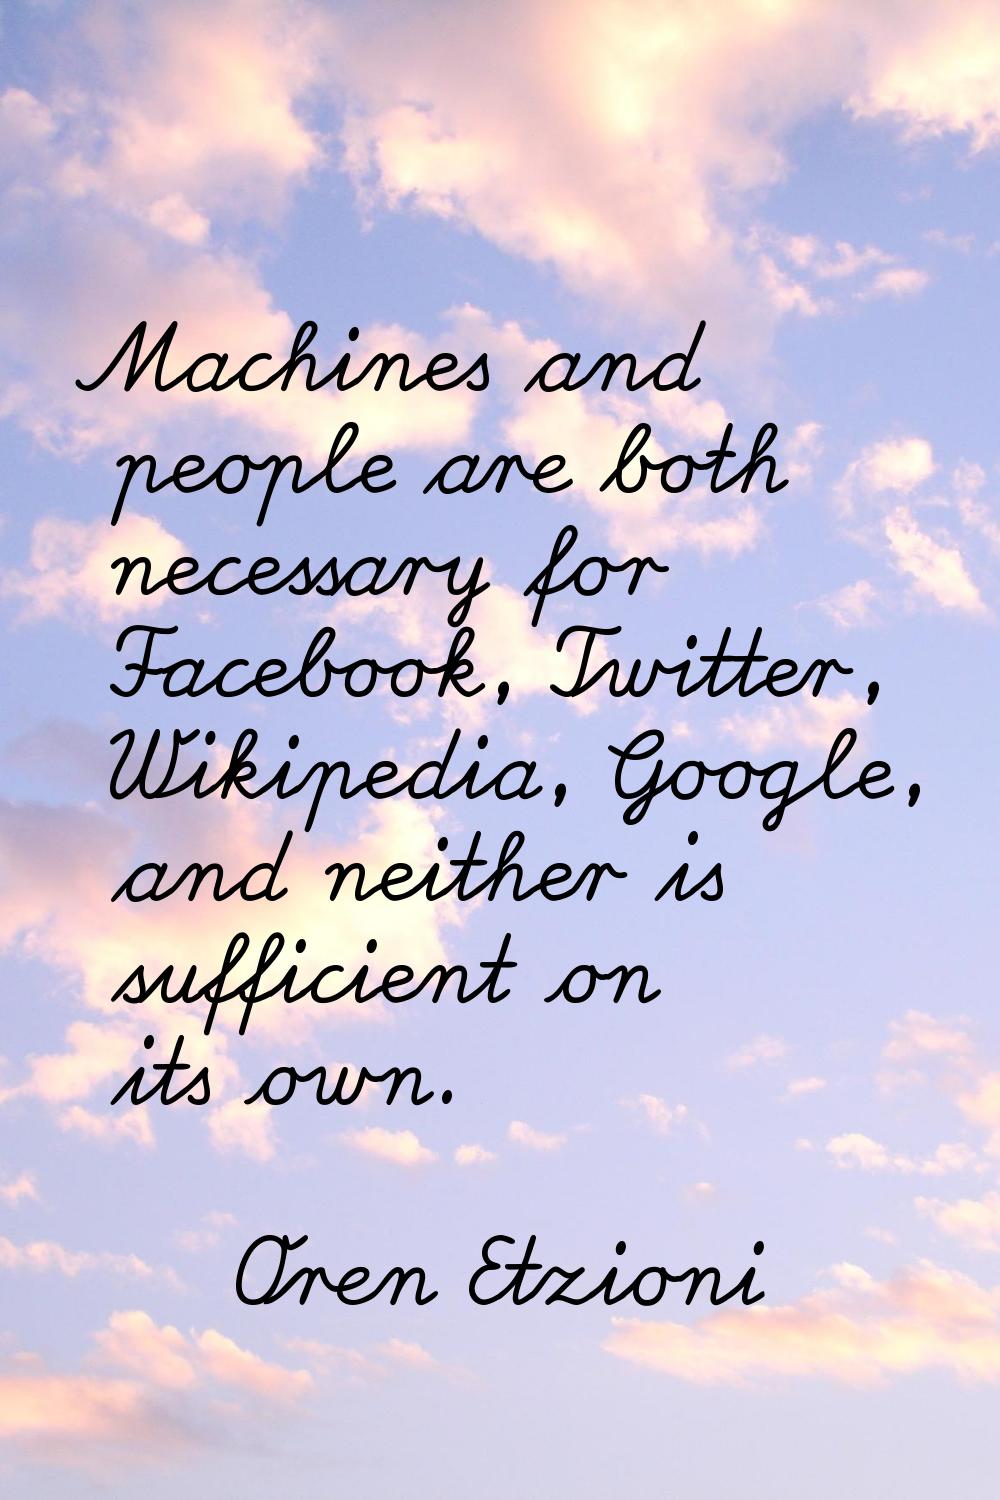 Machines and people are both necessary for Facebook, Twitter, Wikipedia, Google, and neither is suf